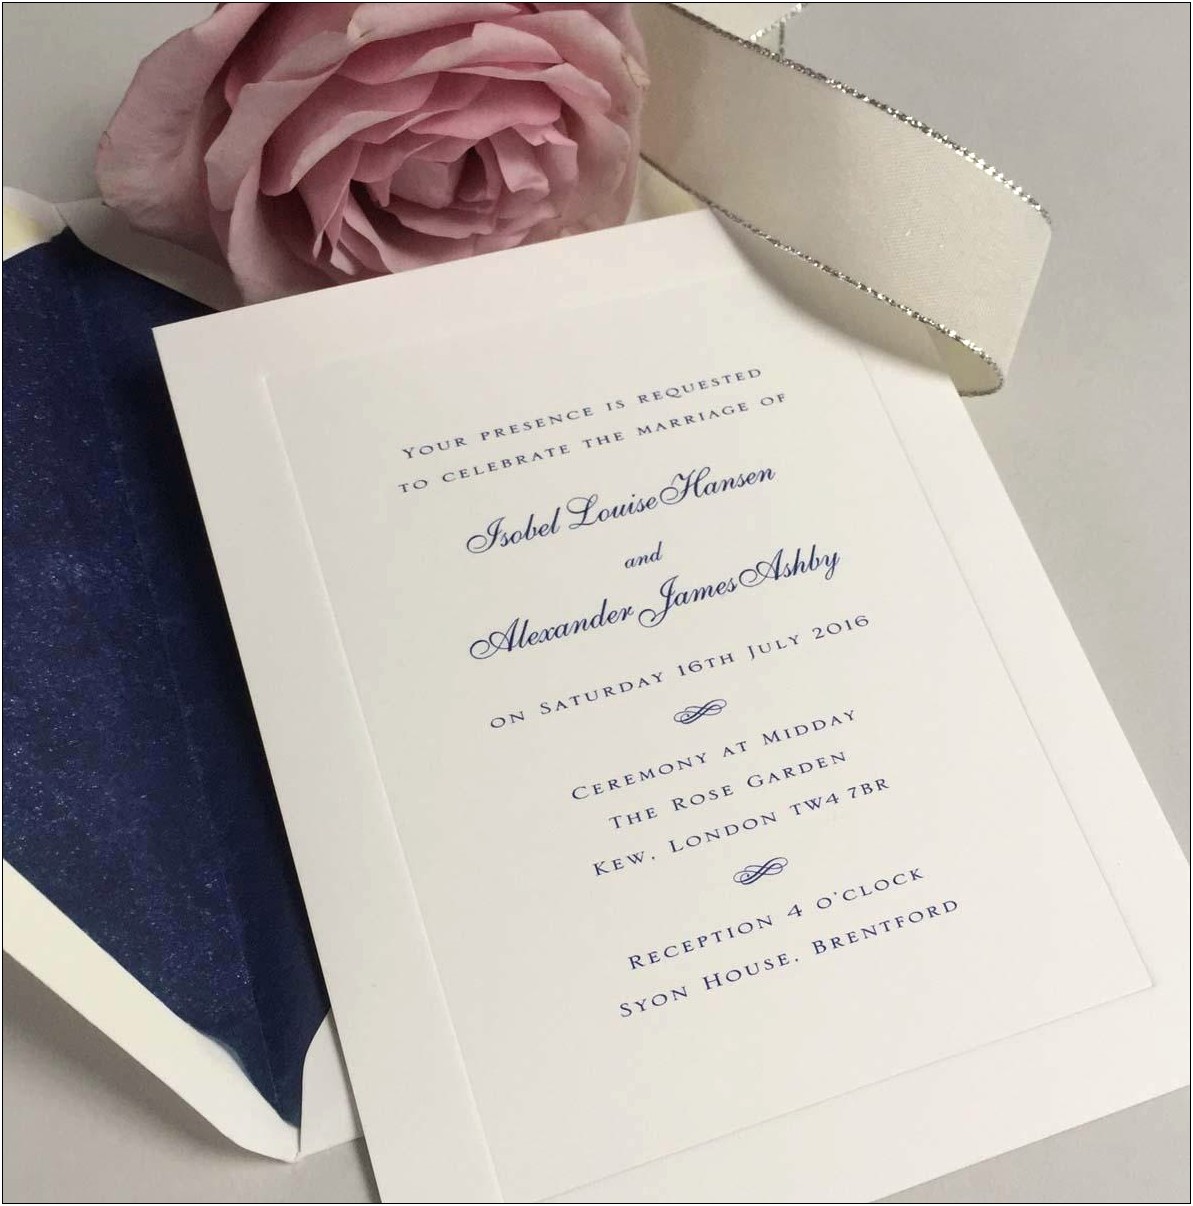 Have The Royal Wedding Invitations Been Sent